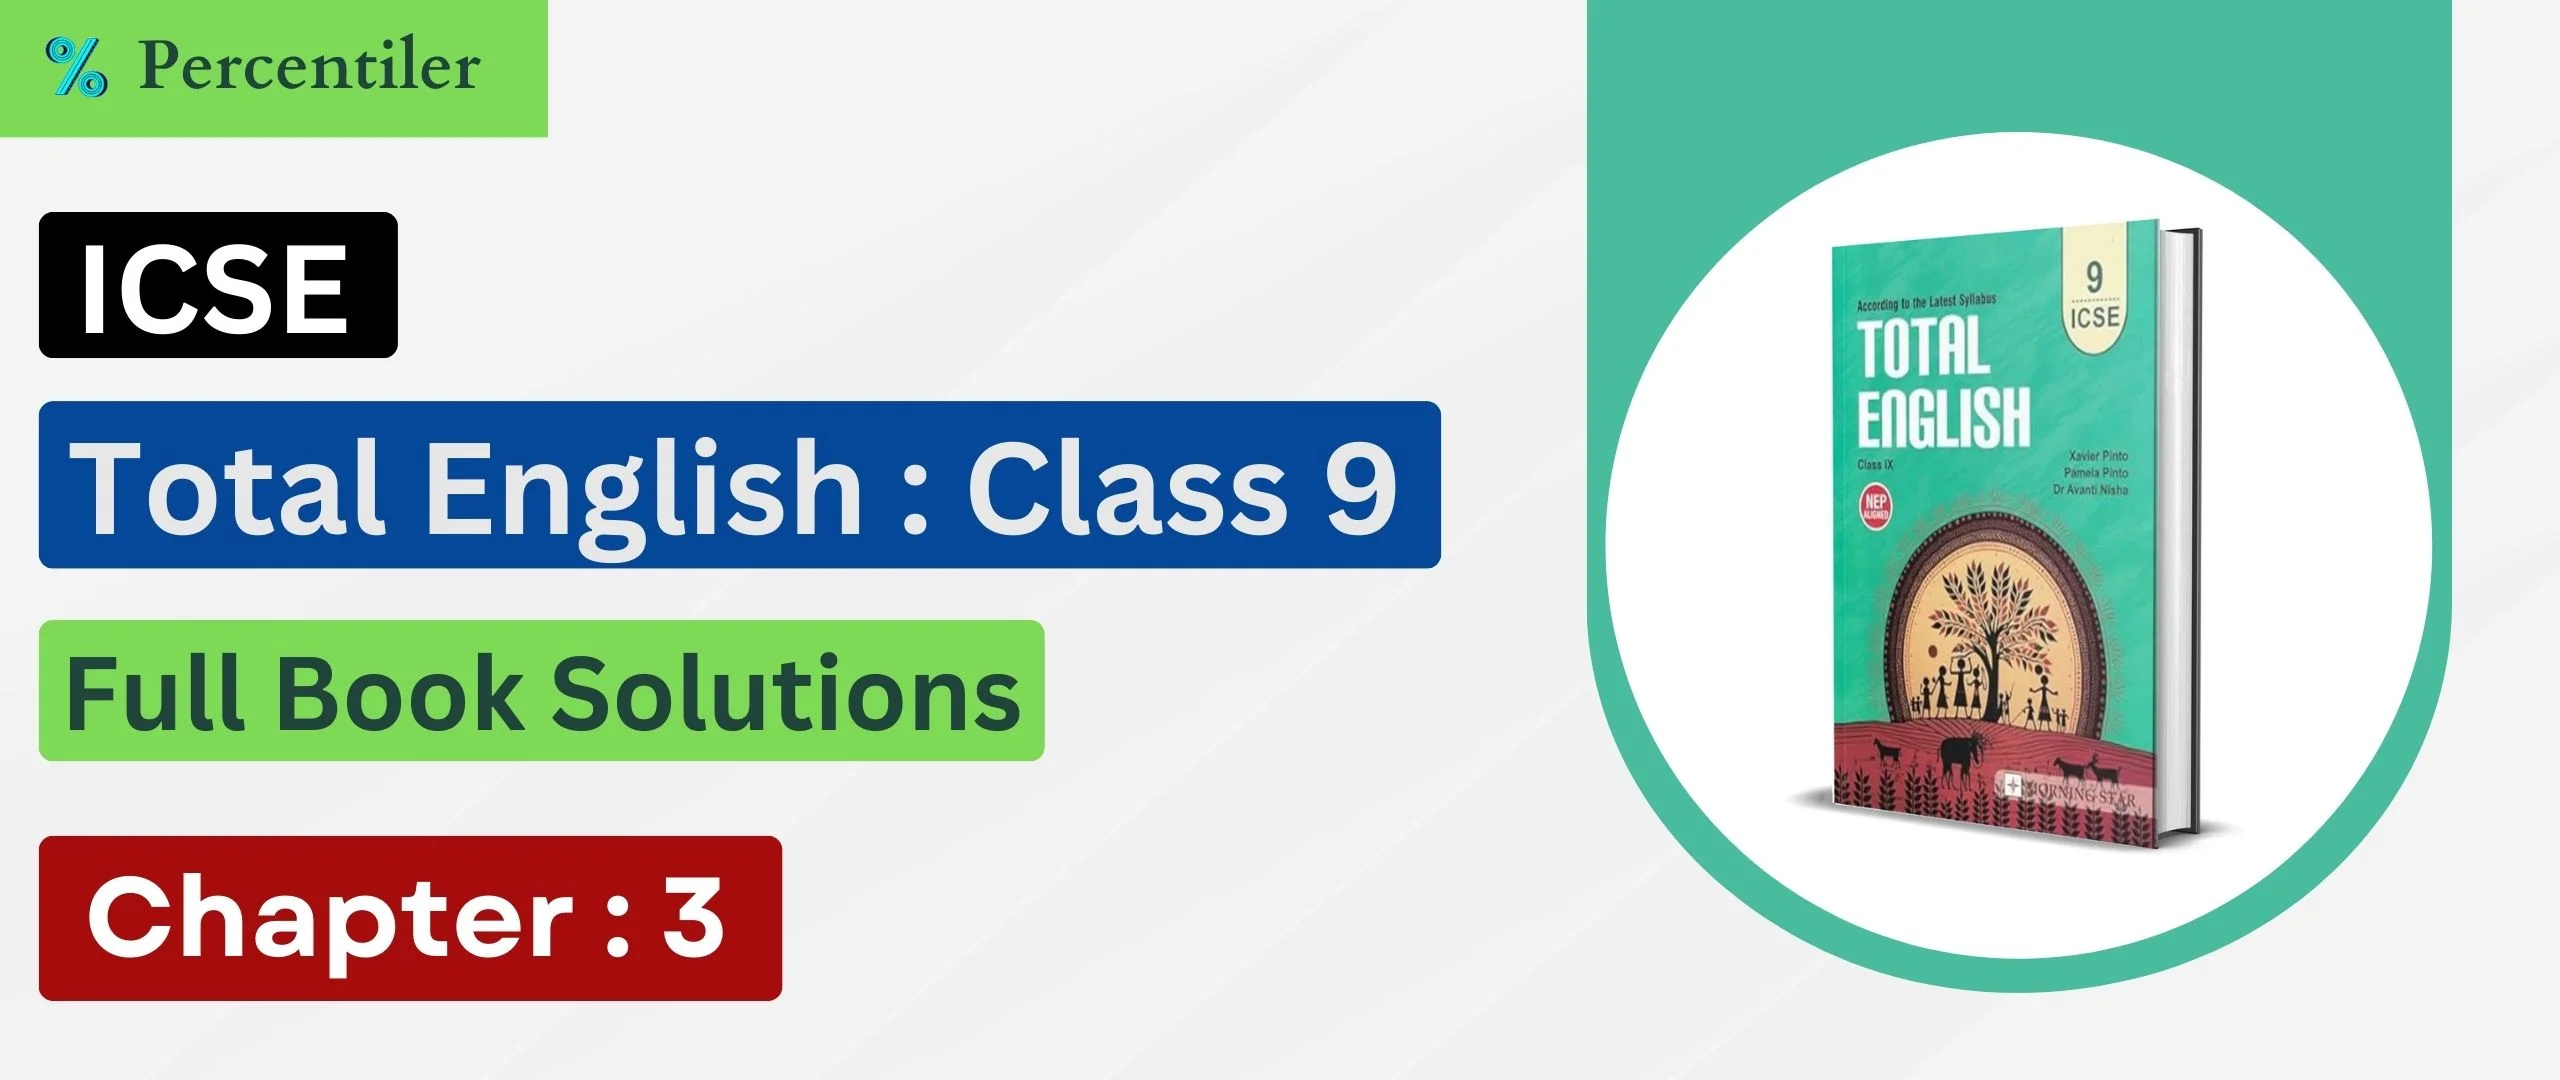 ICSE Total English Class 9 Solutions : Chapter 3